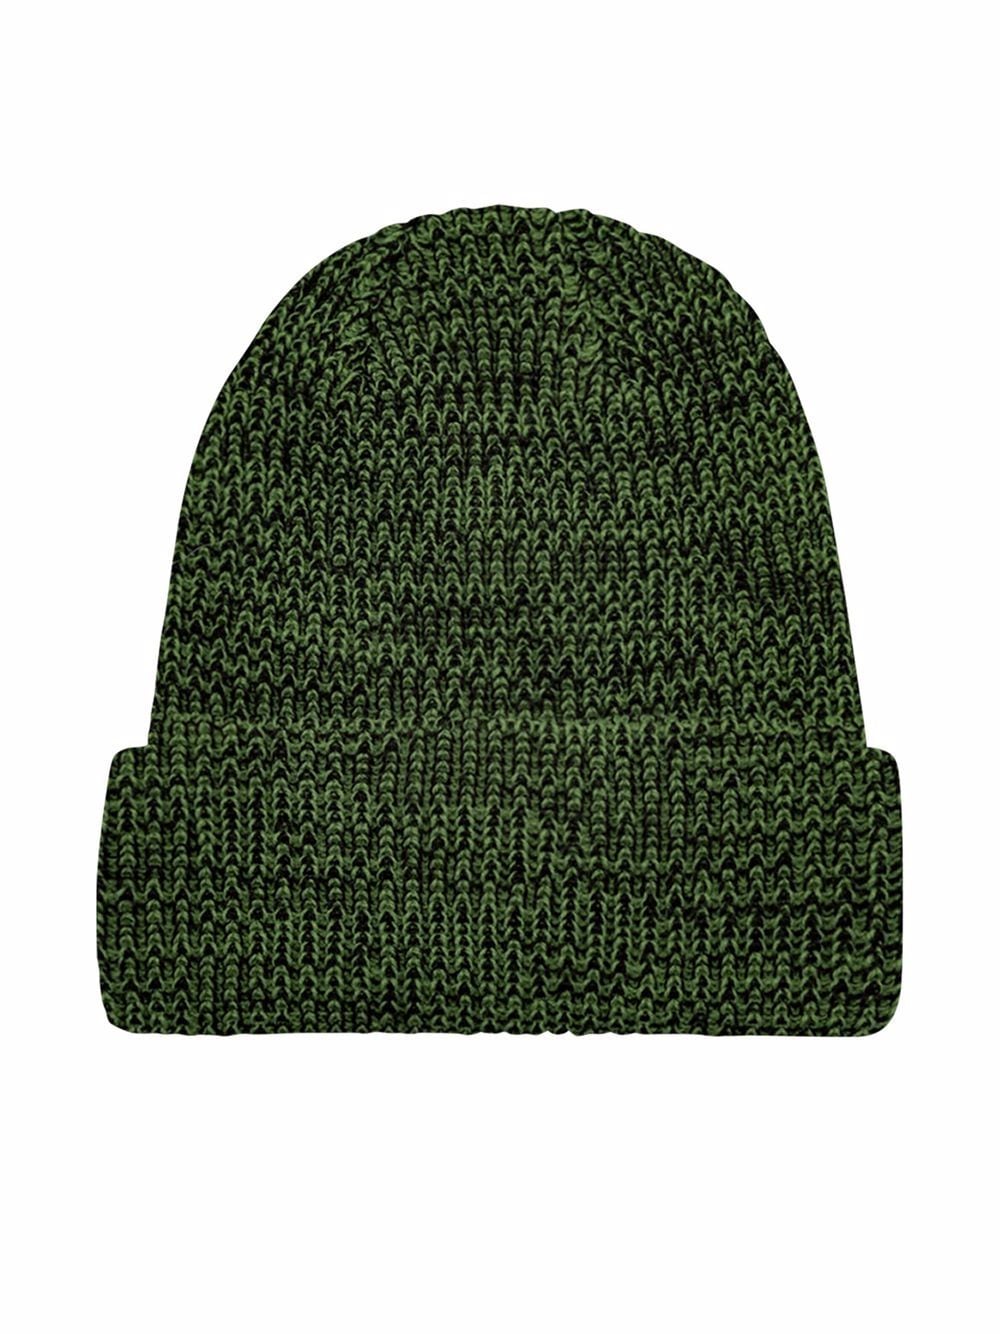 Supreme Twisted Loose Gauge Beanie In Green | ModeSens